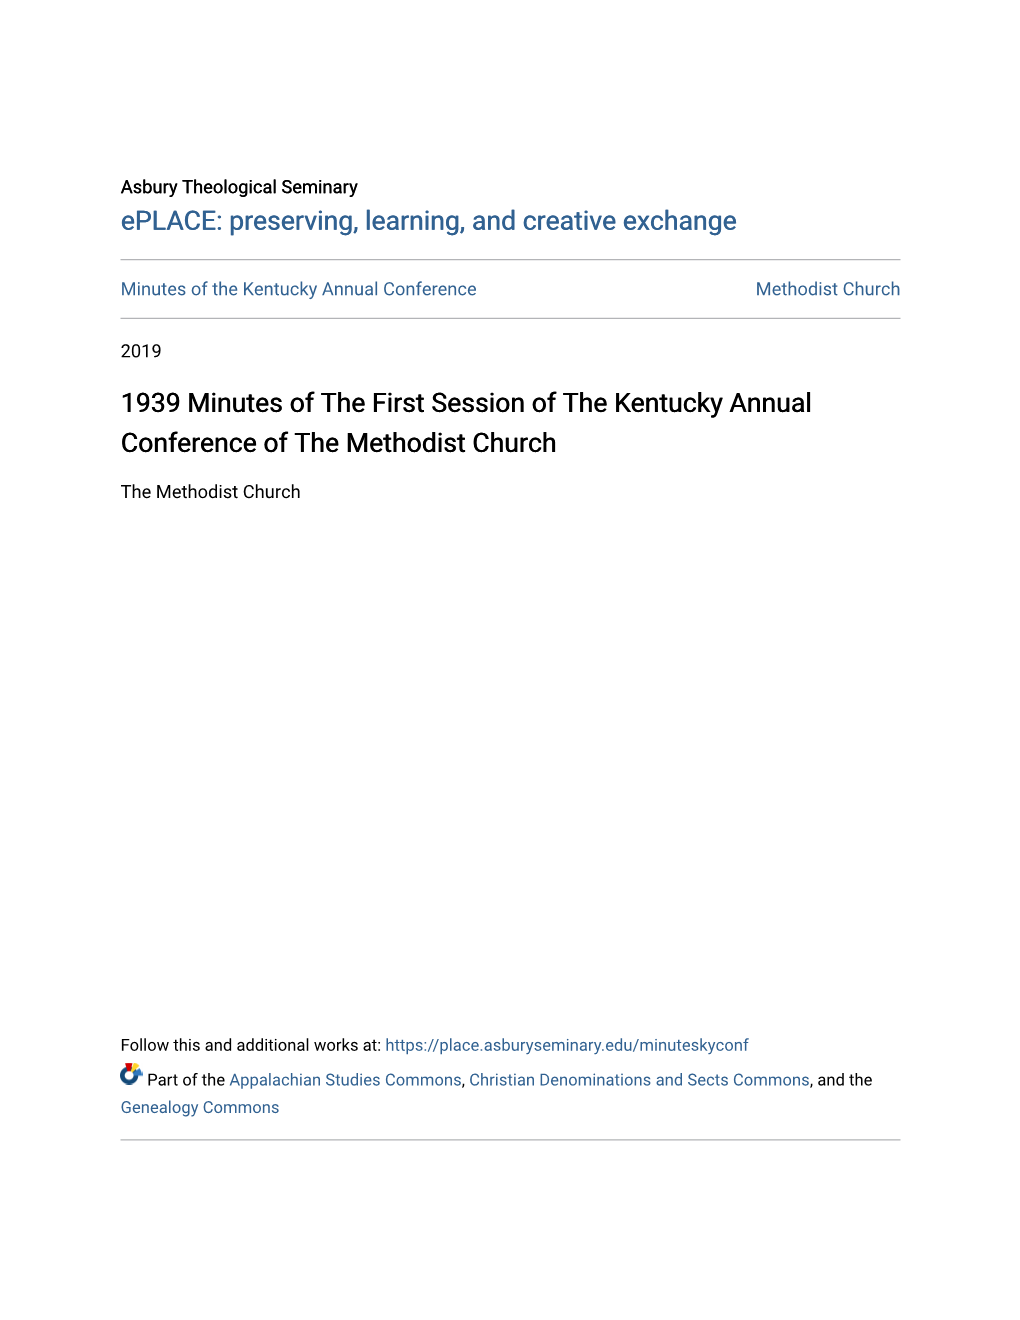 1939 Minutes of the First Session of the Kentucky Annual Conference of the Methodist Church